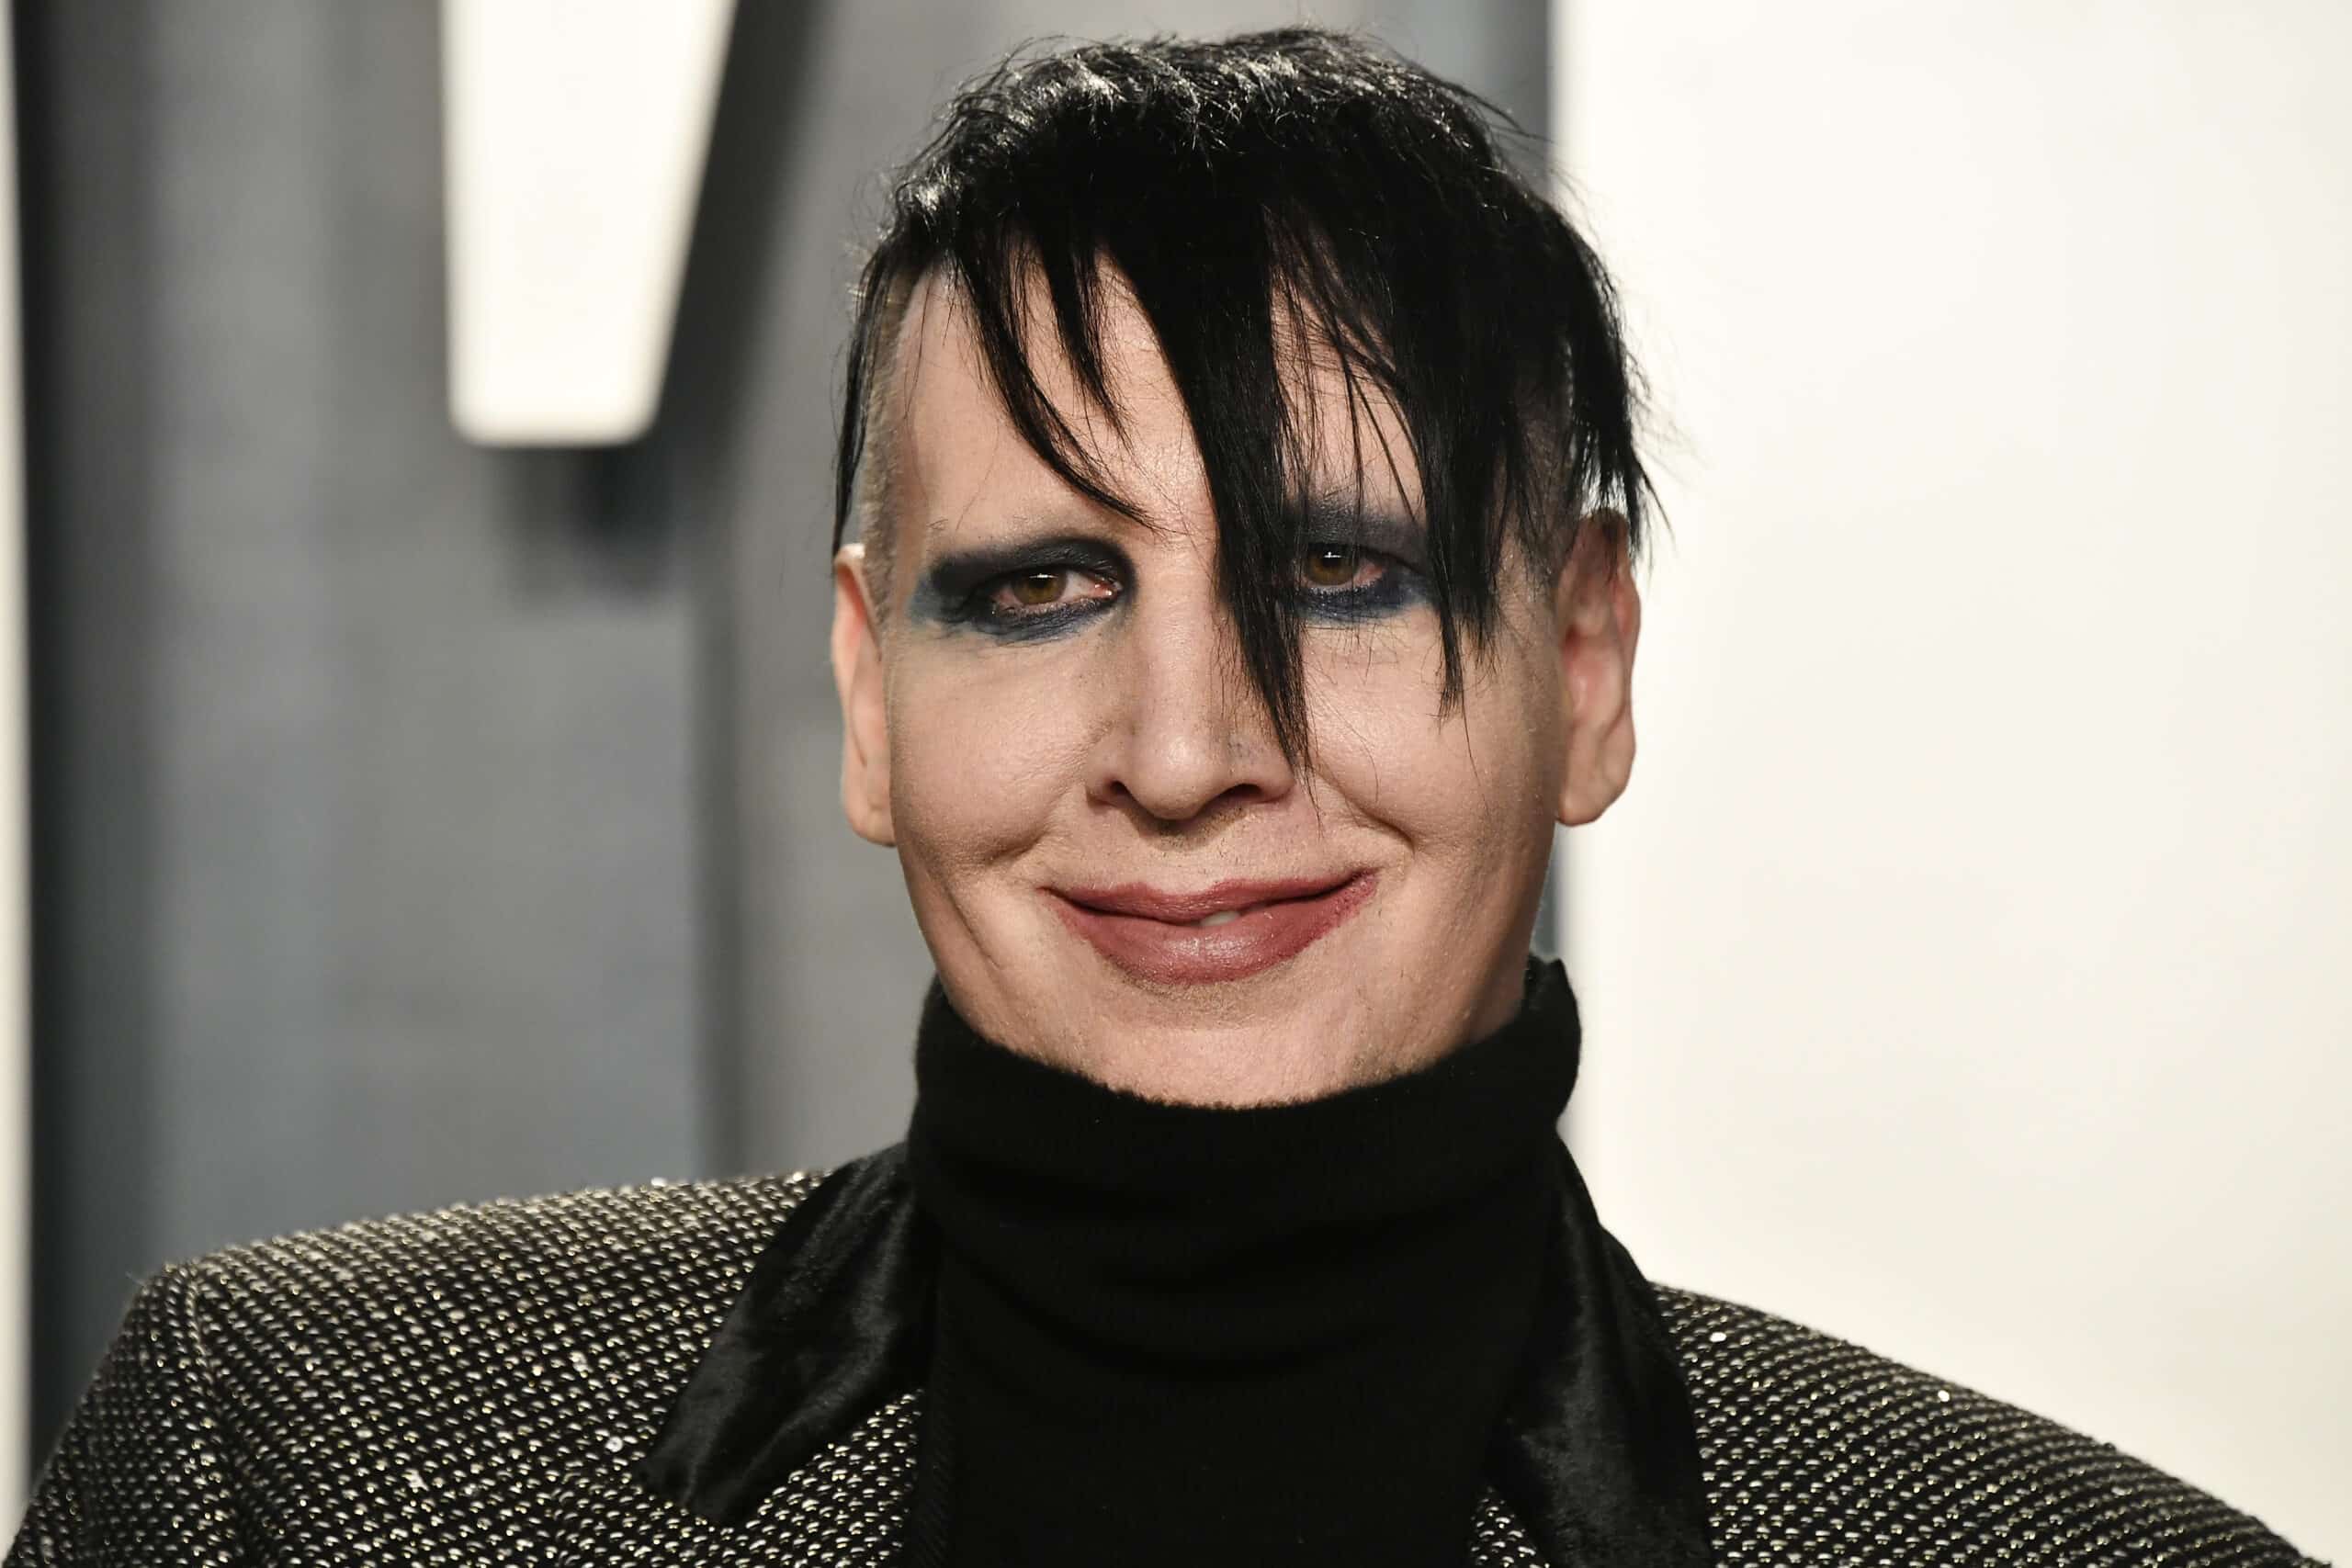 BEVERLY HILLS, CALIFORNIA - FEBRUARY 09: Marilyn Manson attends the 2020 Vanity Fair Oscar Party hosted by Radhika Jones at Wallis Annenberg Center for the Performing Arts on February 09, 2020 in Beverly Hills, California.